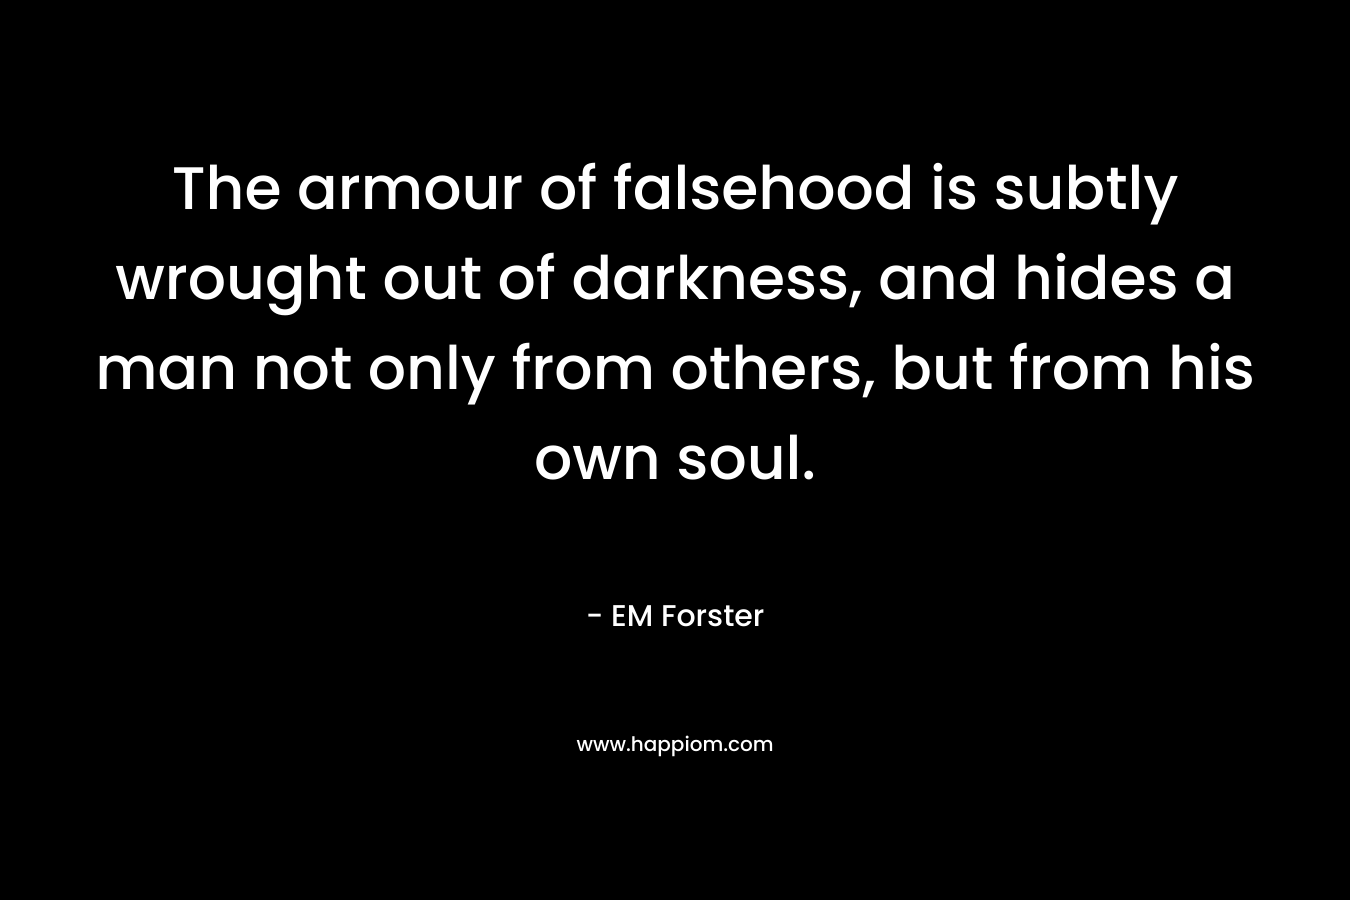 The armour of falsehood is subtly wrought out of darkness, and hides a man not only from others, but from his own soul. – EM Forster